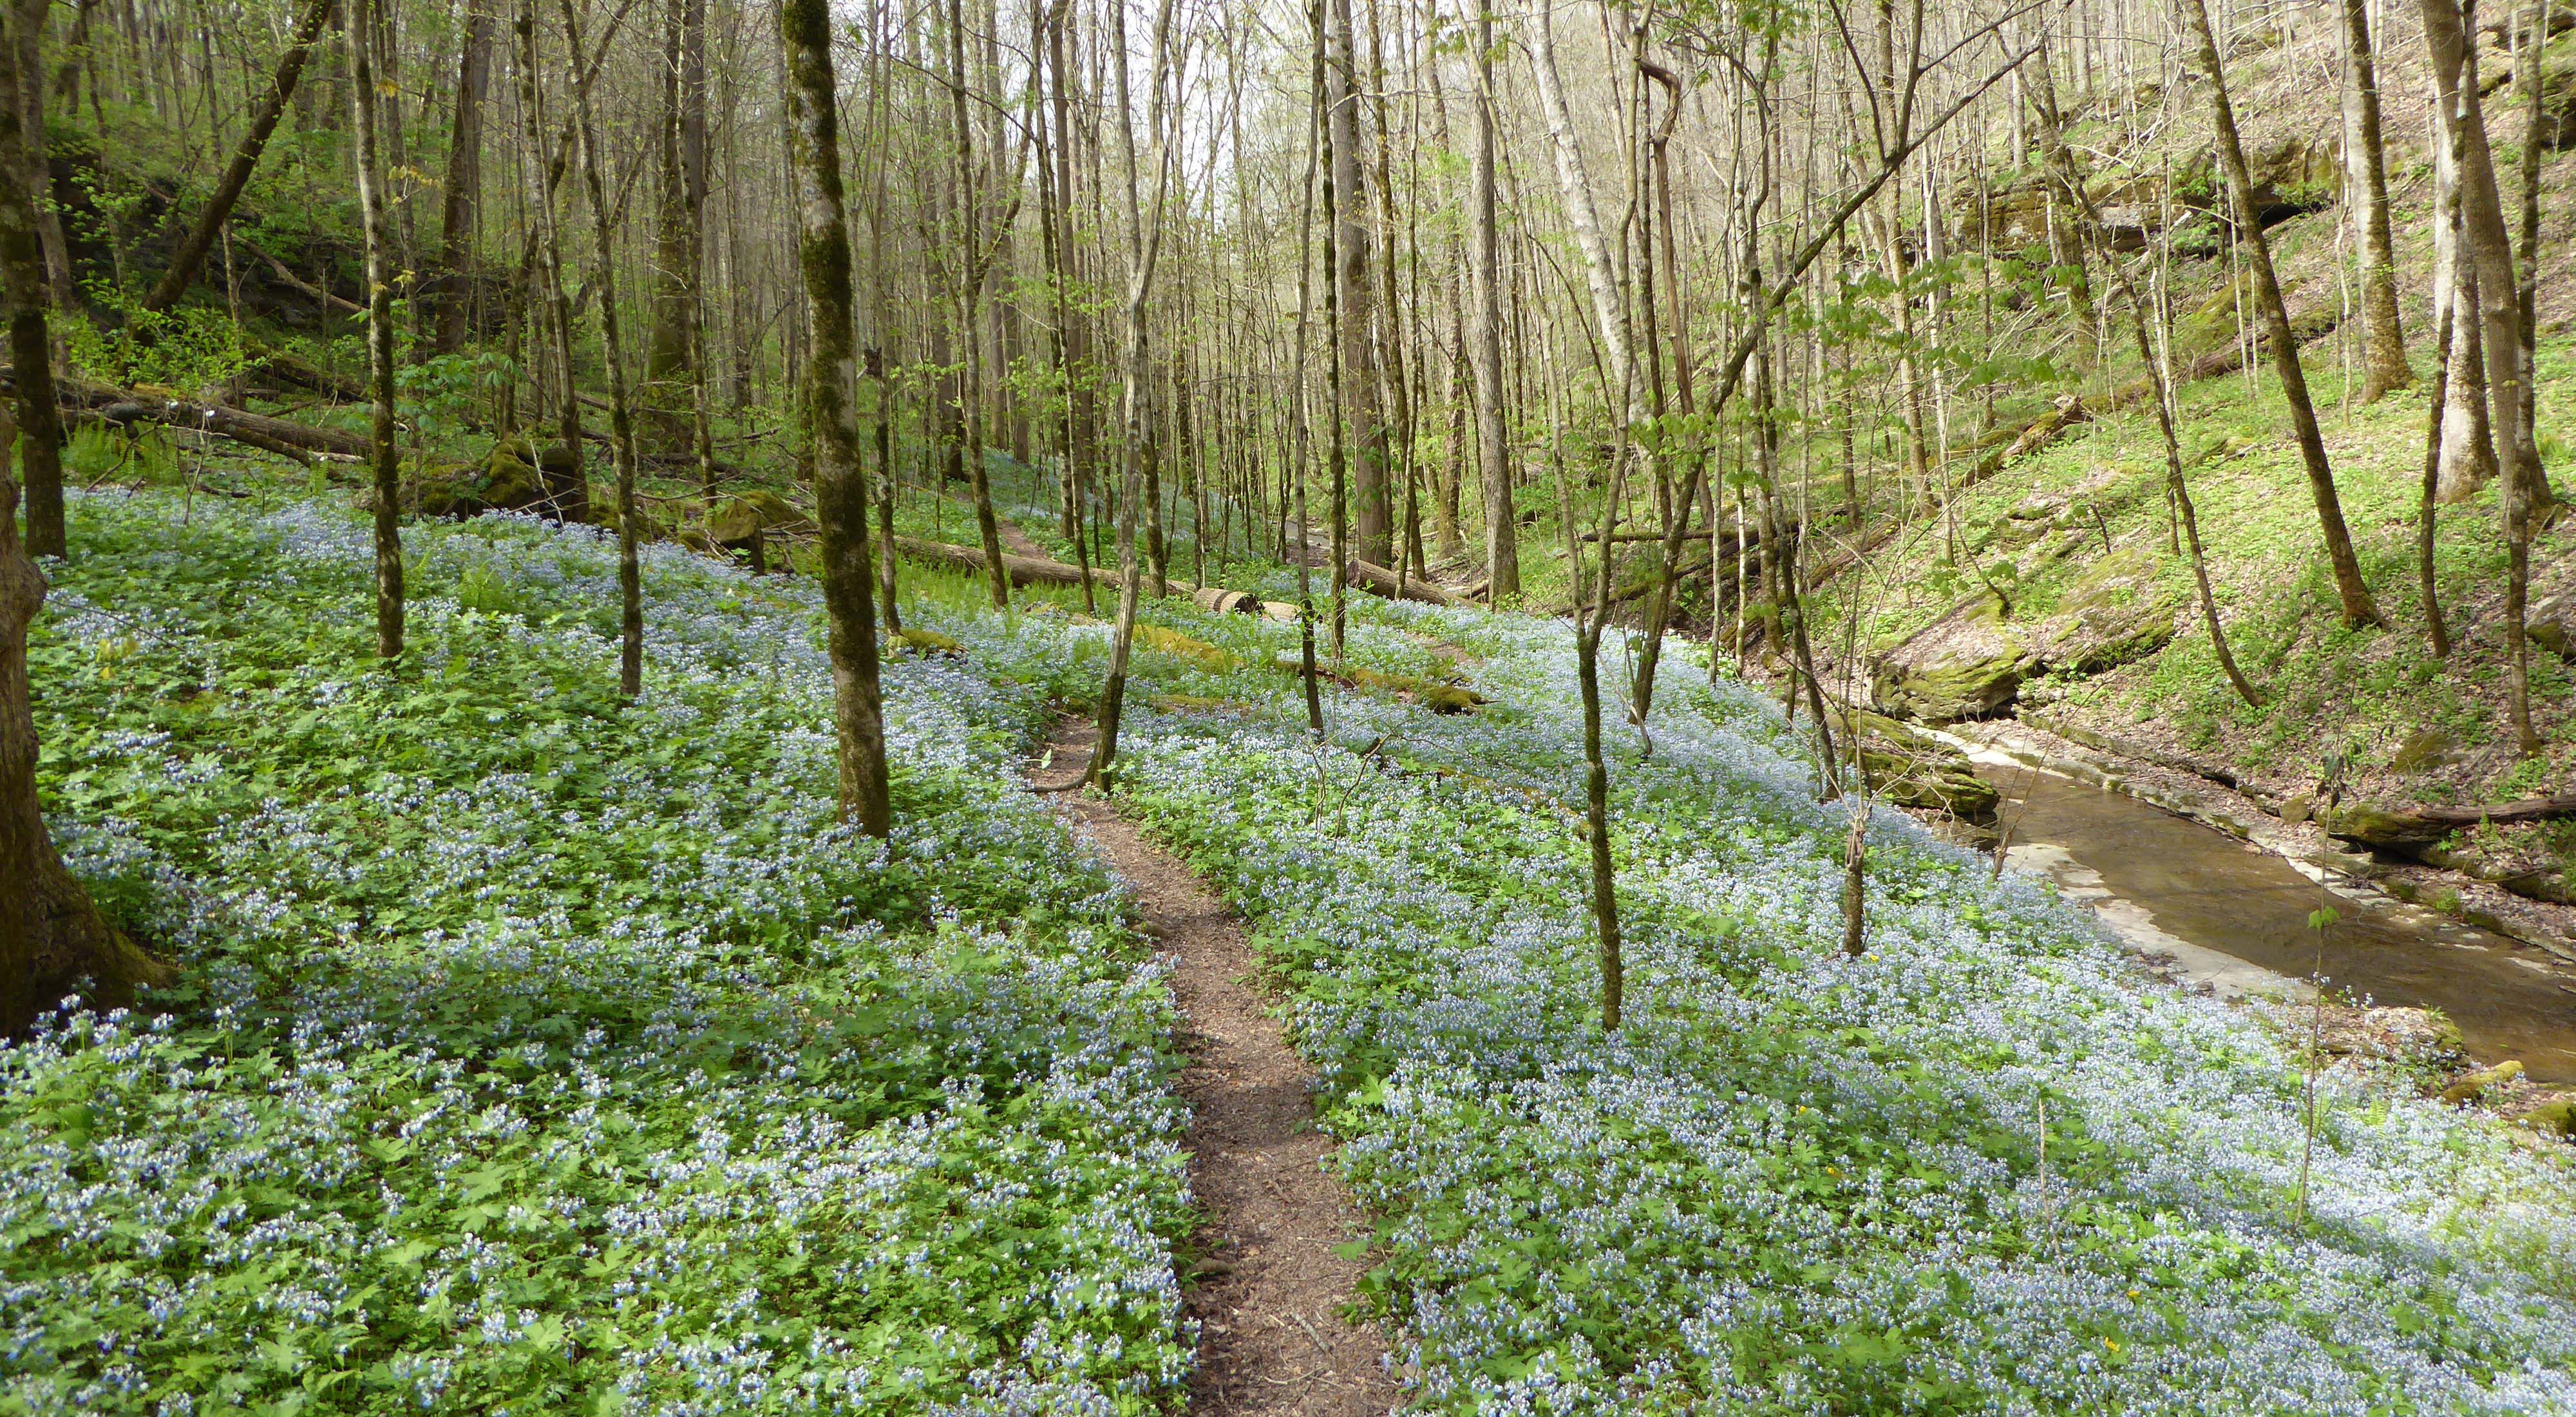 A wooded valley with purple wildflowers growing in the understory.